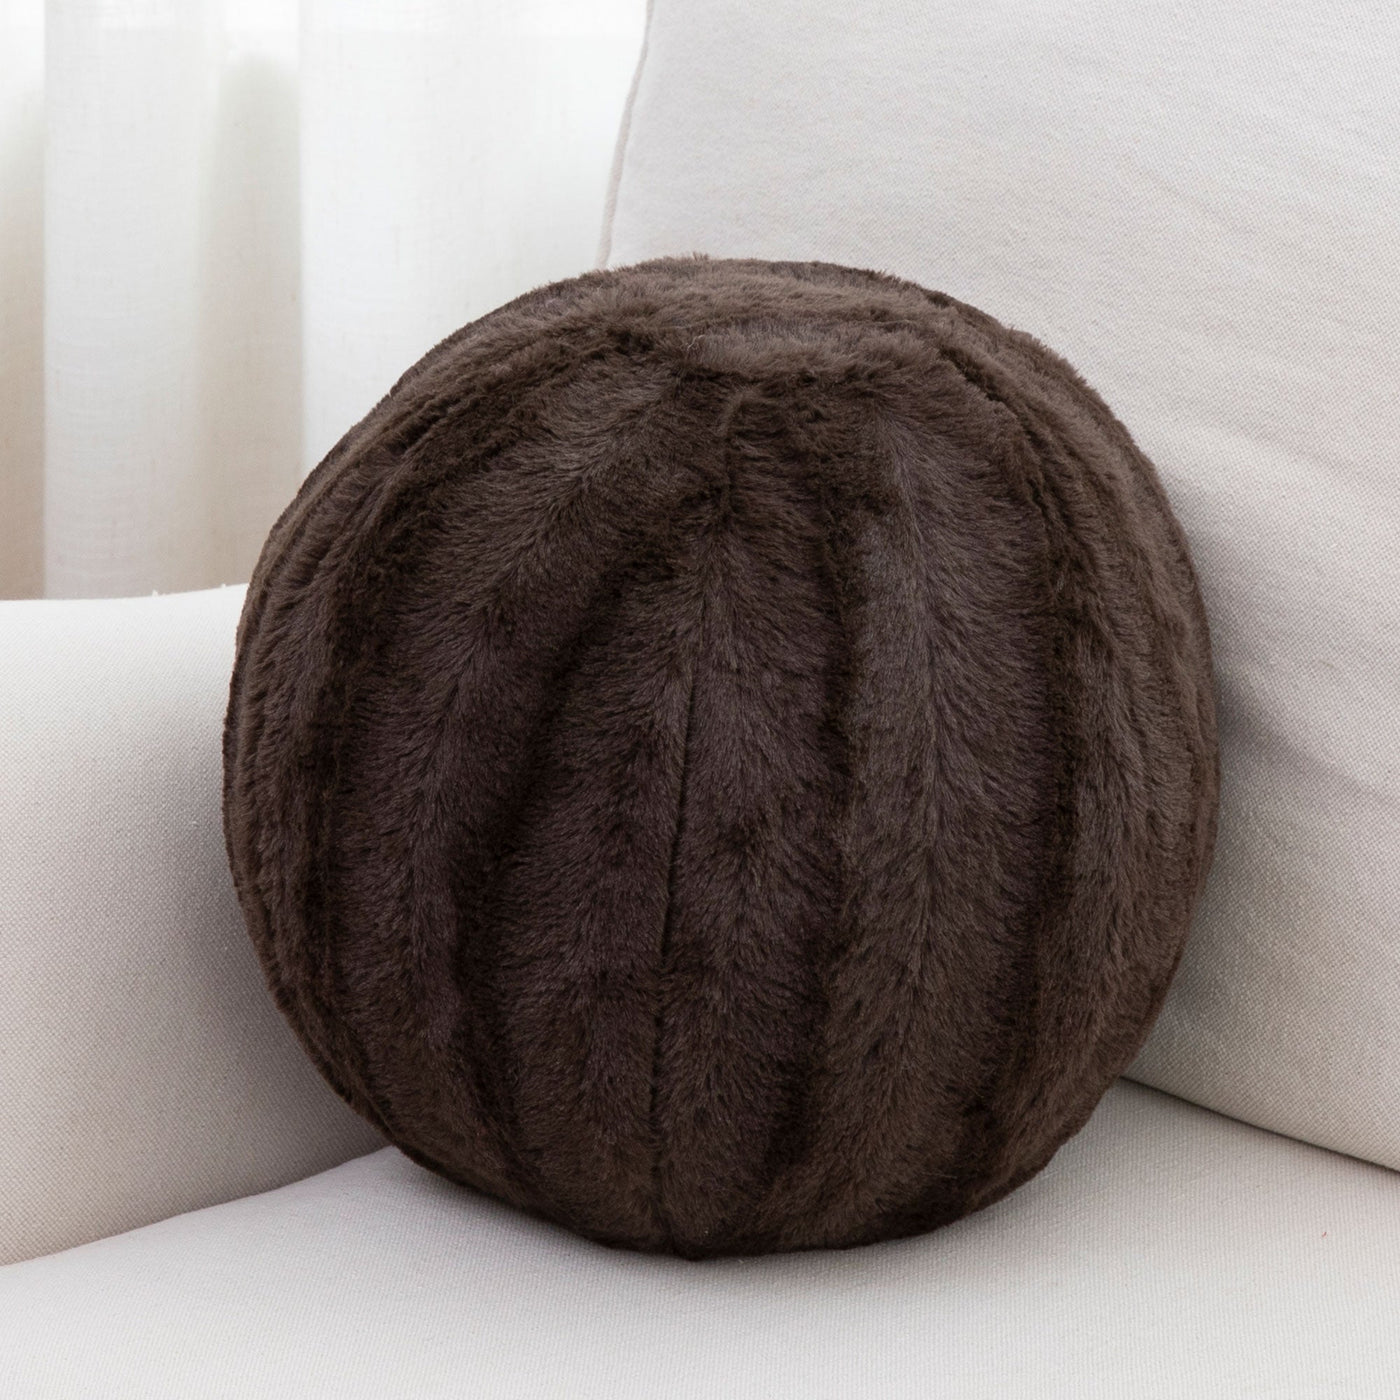 https://www.cheercollection.com/cdn/shop/products/cheer-collection-ball-throw-pillows-for-living-room-decor-decorative-pillows-for-couch-fluffy-aesthetic-cuddle-pillow-with-insert-10-round-626778_1400x.jpg?v=1683775475